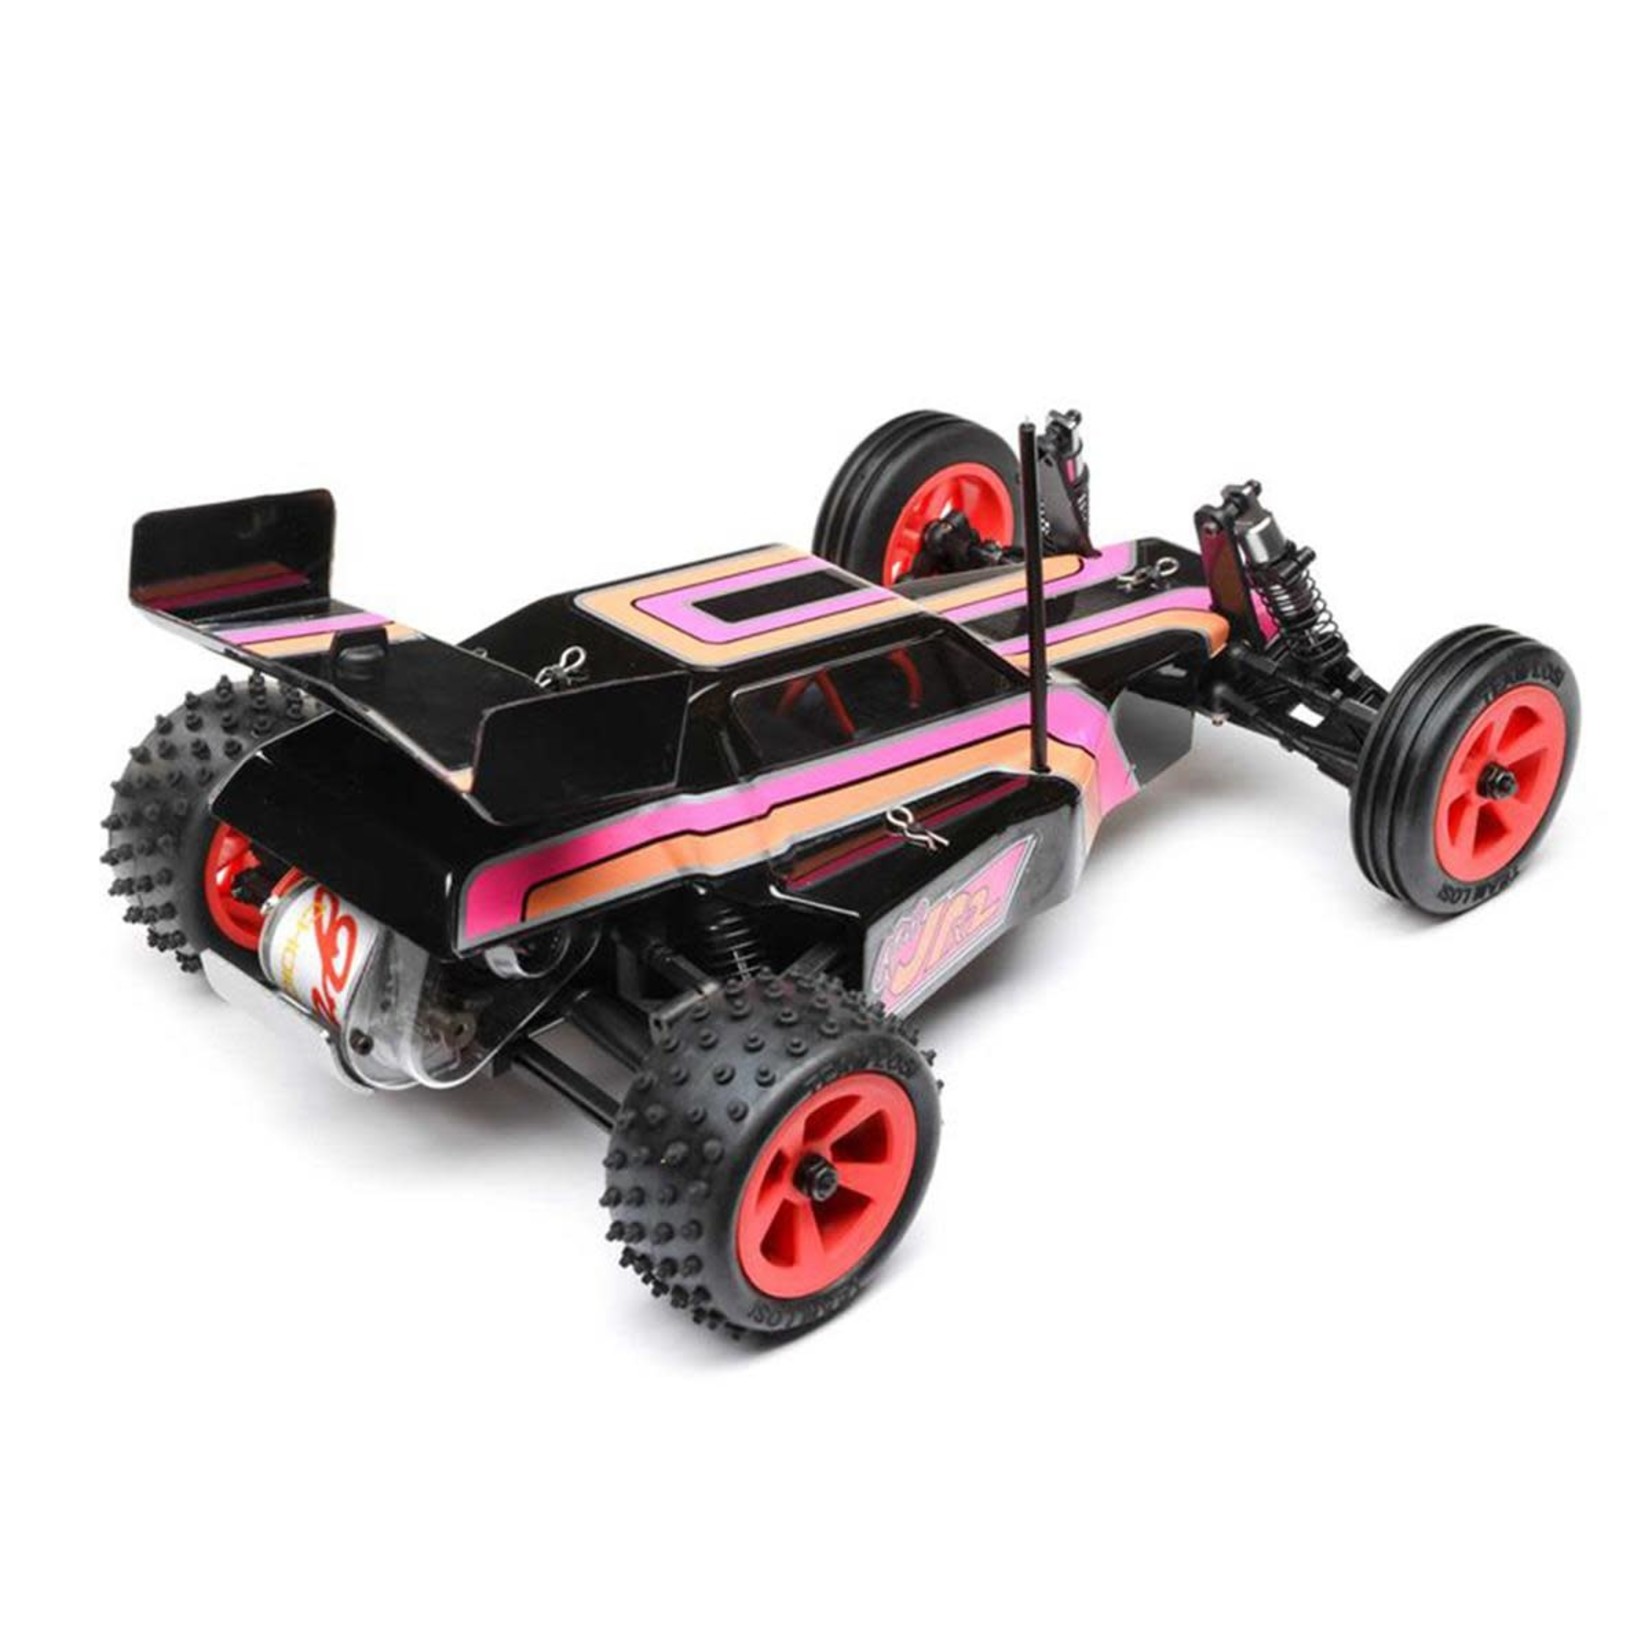 Losi Losi JRX2 1/16 RTR 2WD Buggy (Black) w/2.4GHz Radio, Battery & Charger #LOS01020T3